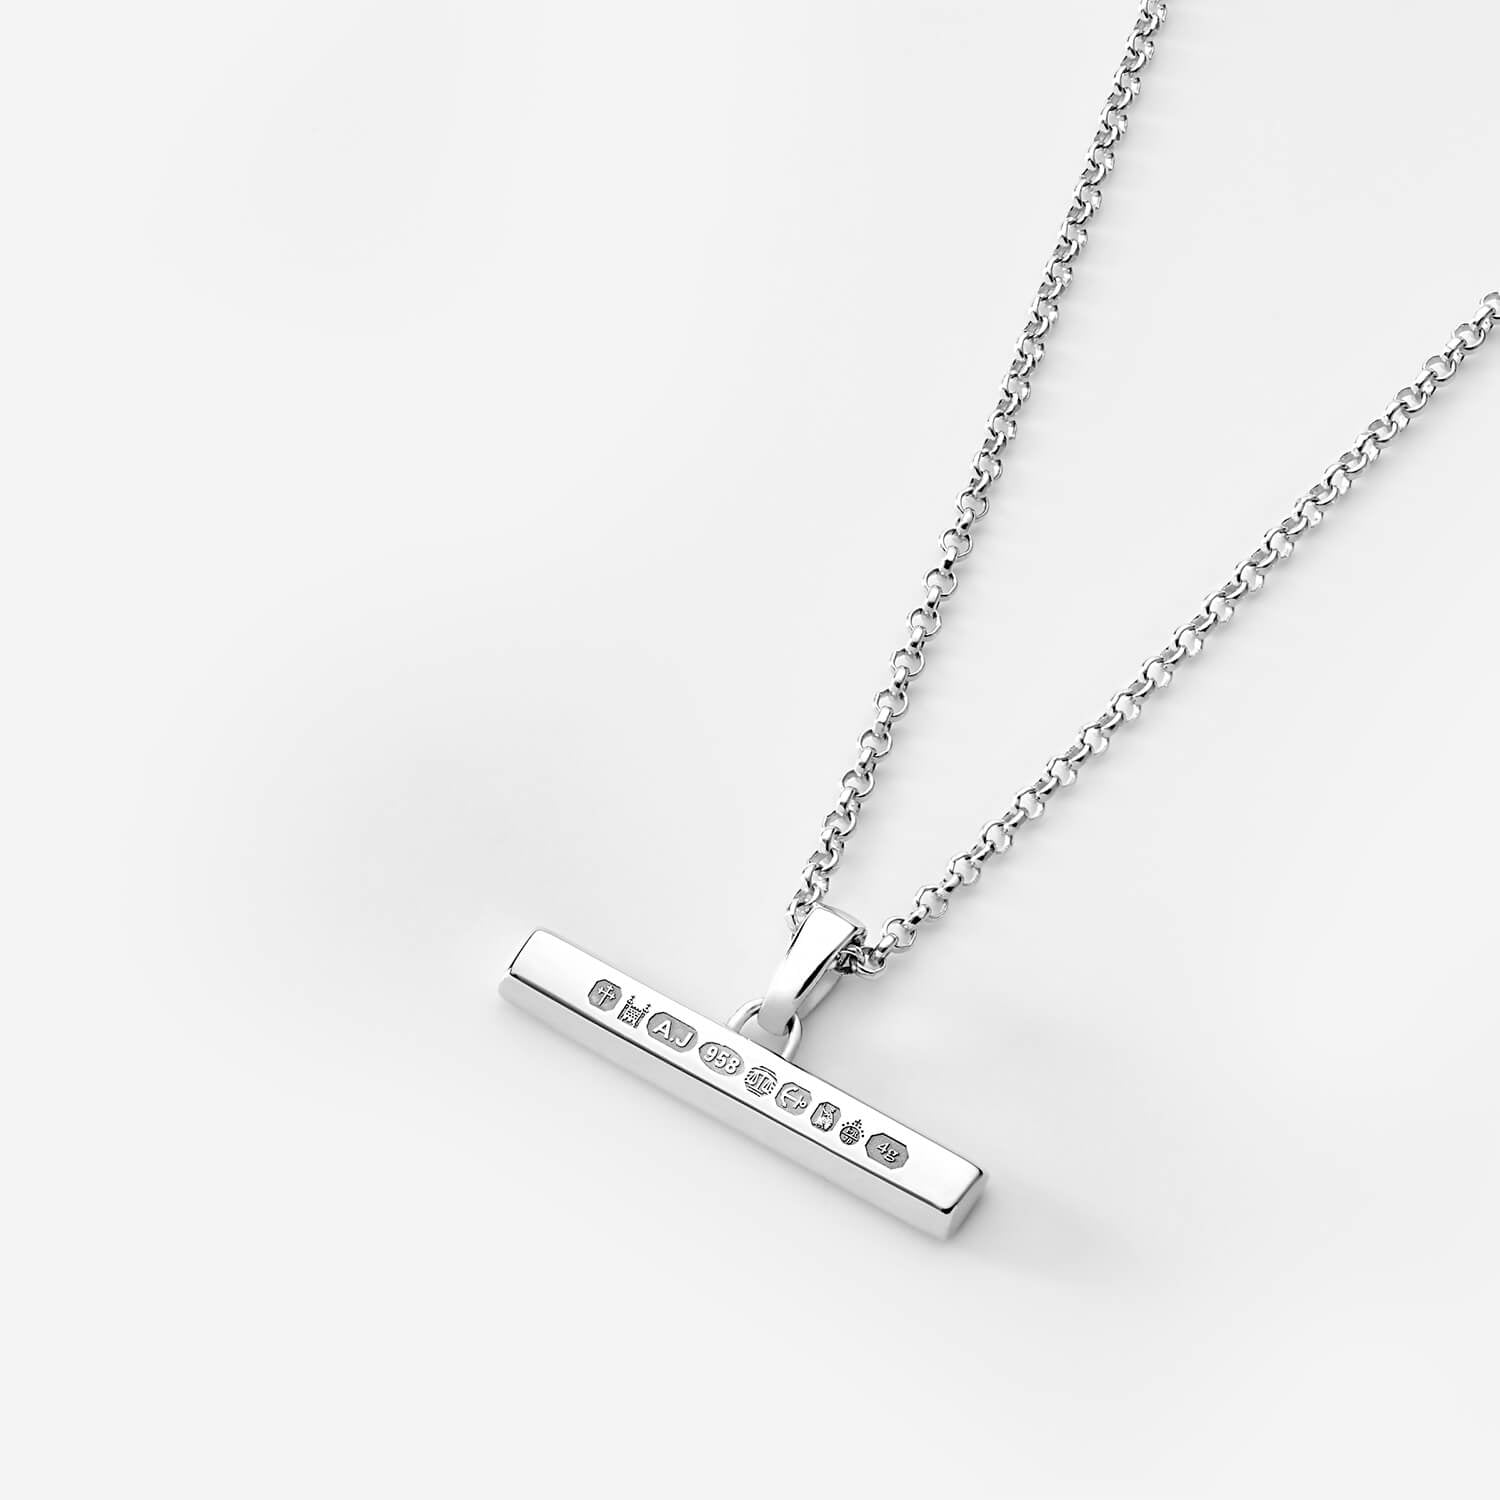 886 Royal Mint Necklaces 886 T-Bar Pendant with Chain in Sterling Silver